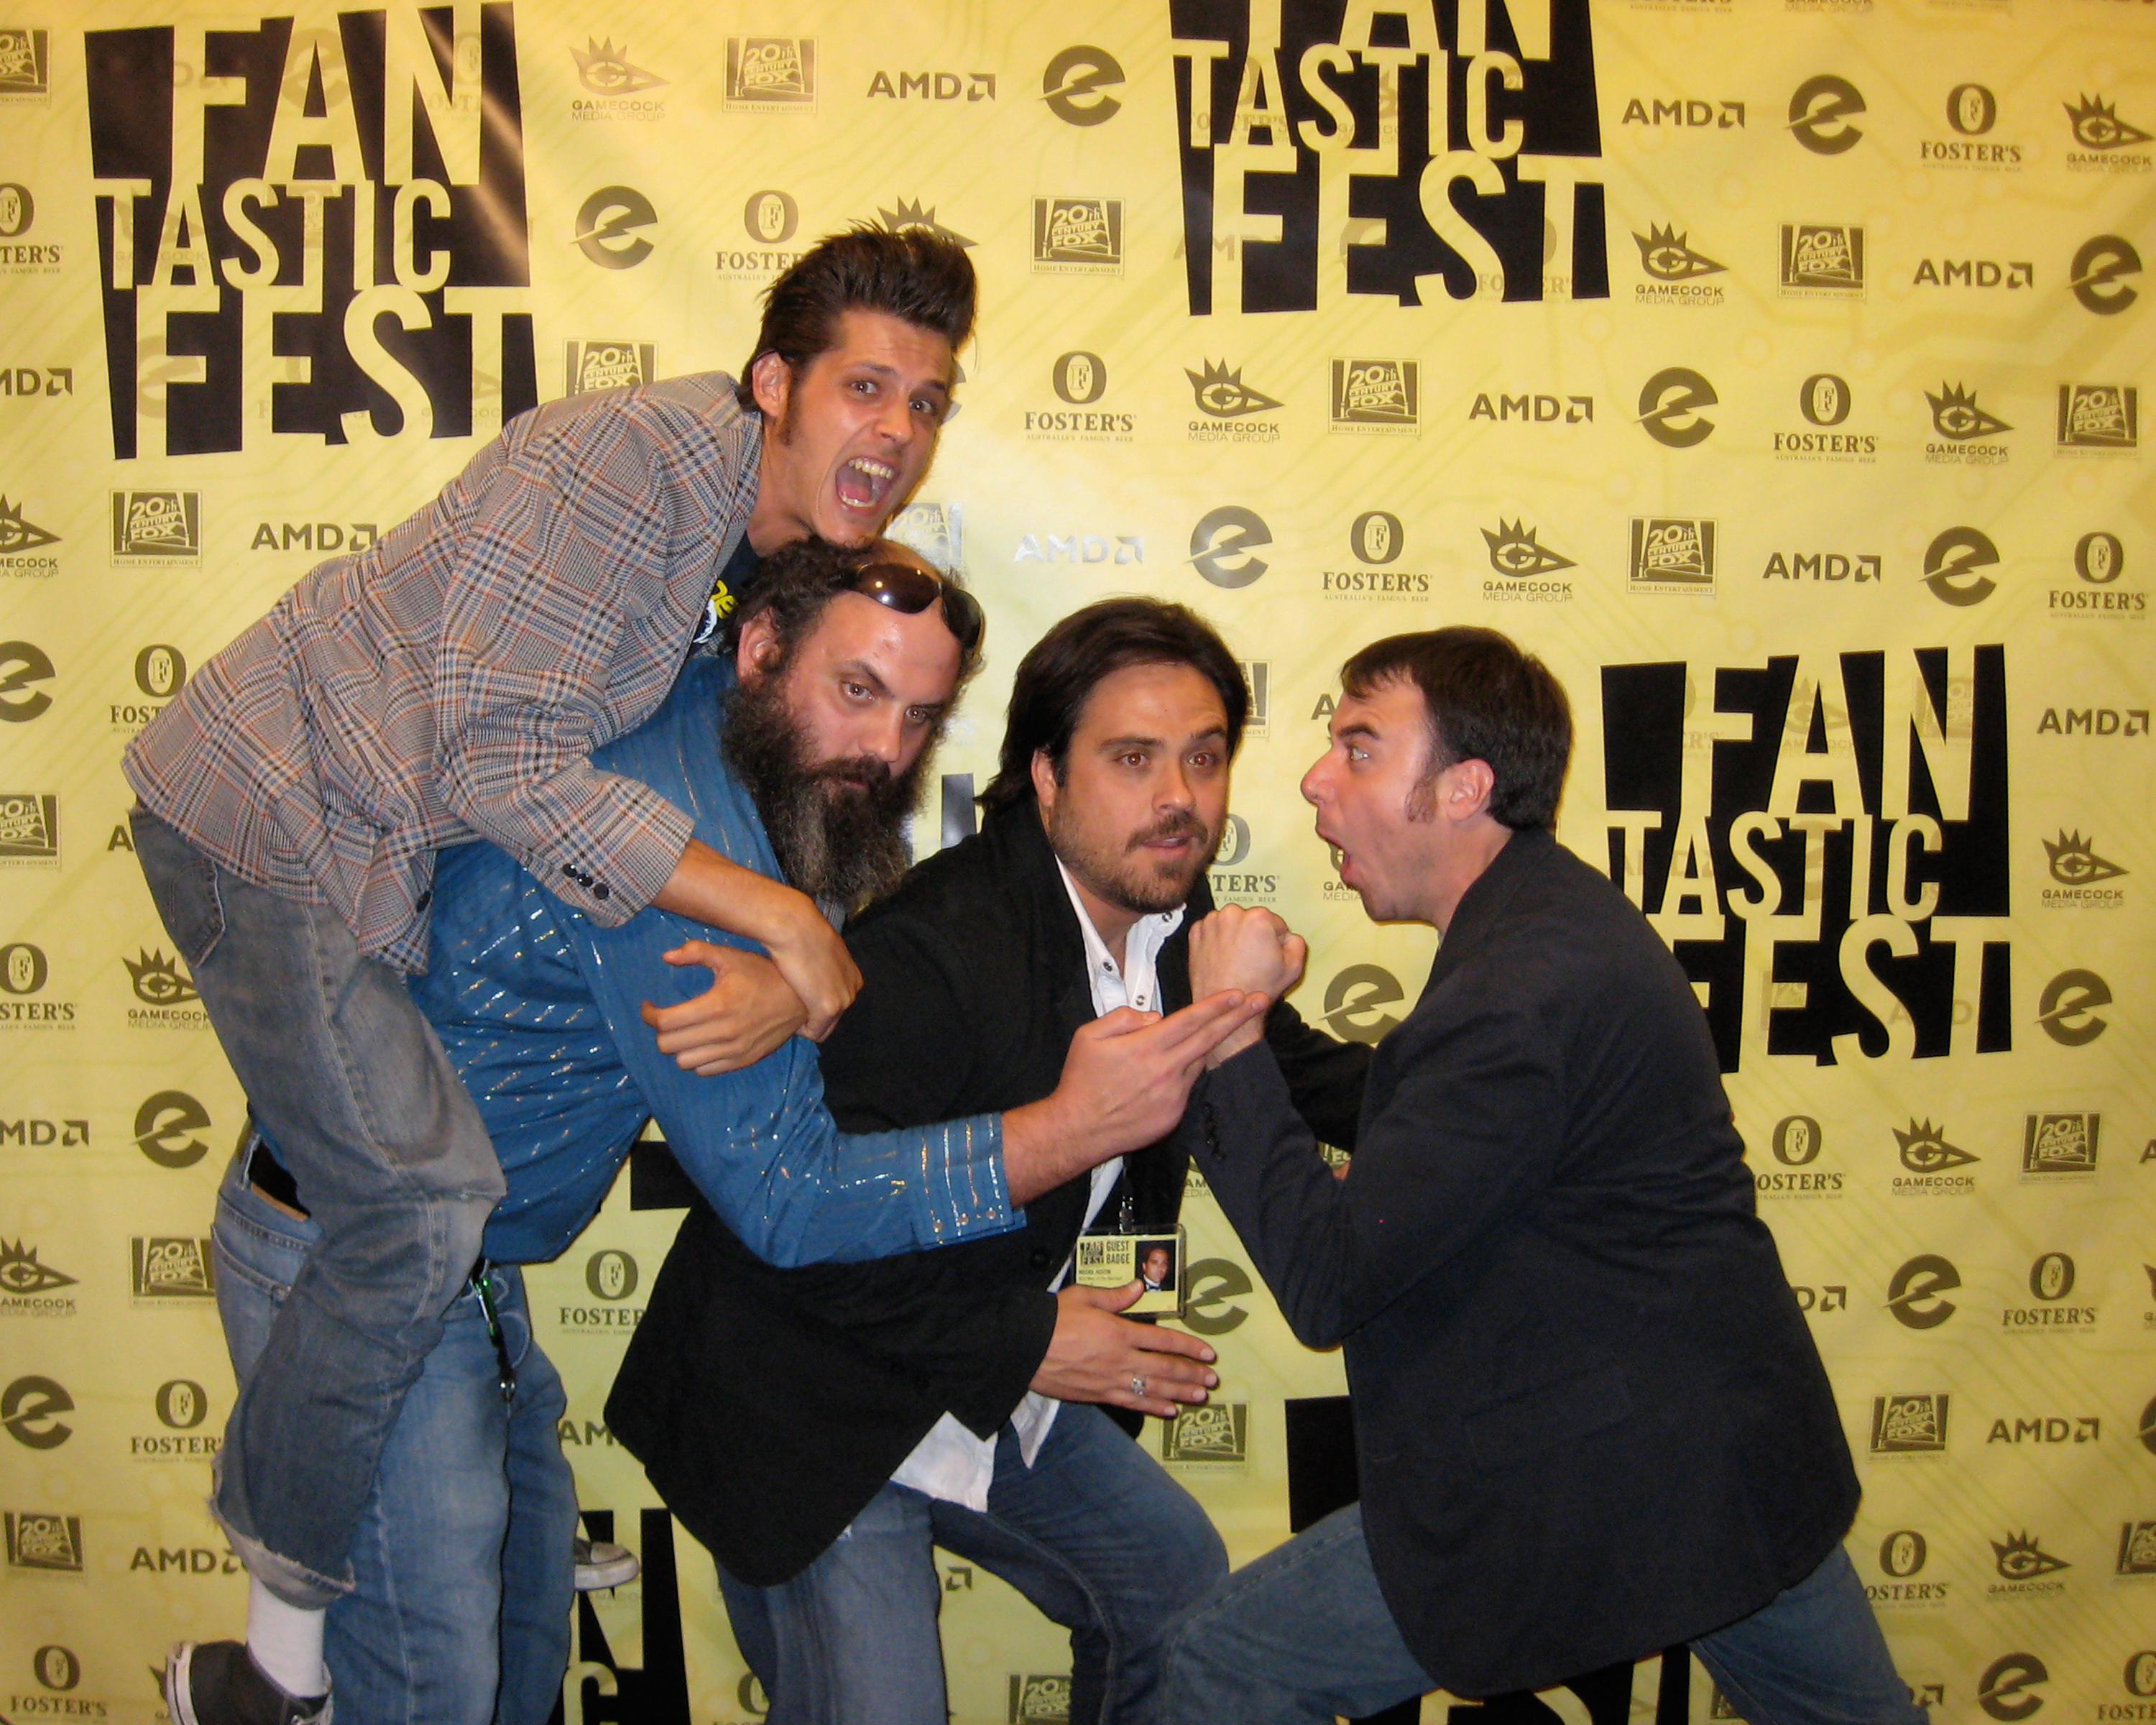 L-R: Actors Charlie Hurtin, Tony Wolford and co-directors Justin Meeks and Duane Graves at the regional premiere of THE WILD MAN OF THE NAVIDAD, Fantastic Fest 2008, Austin, Texas